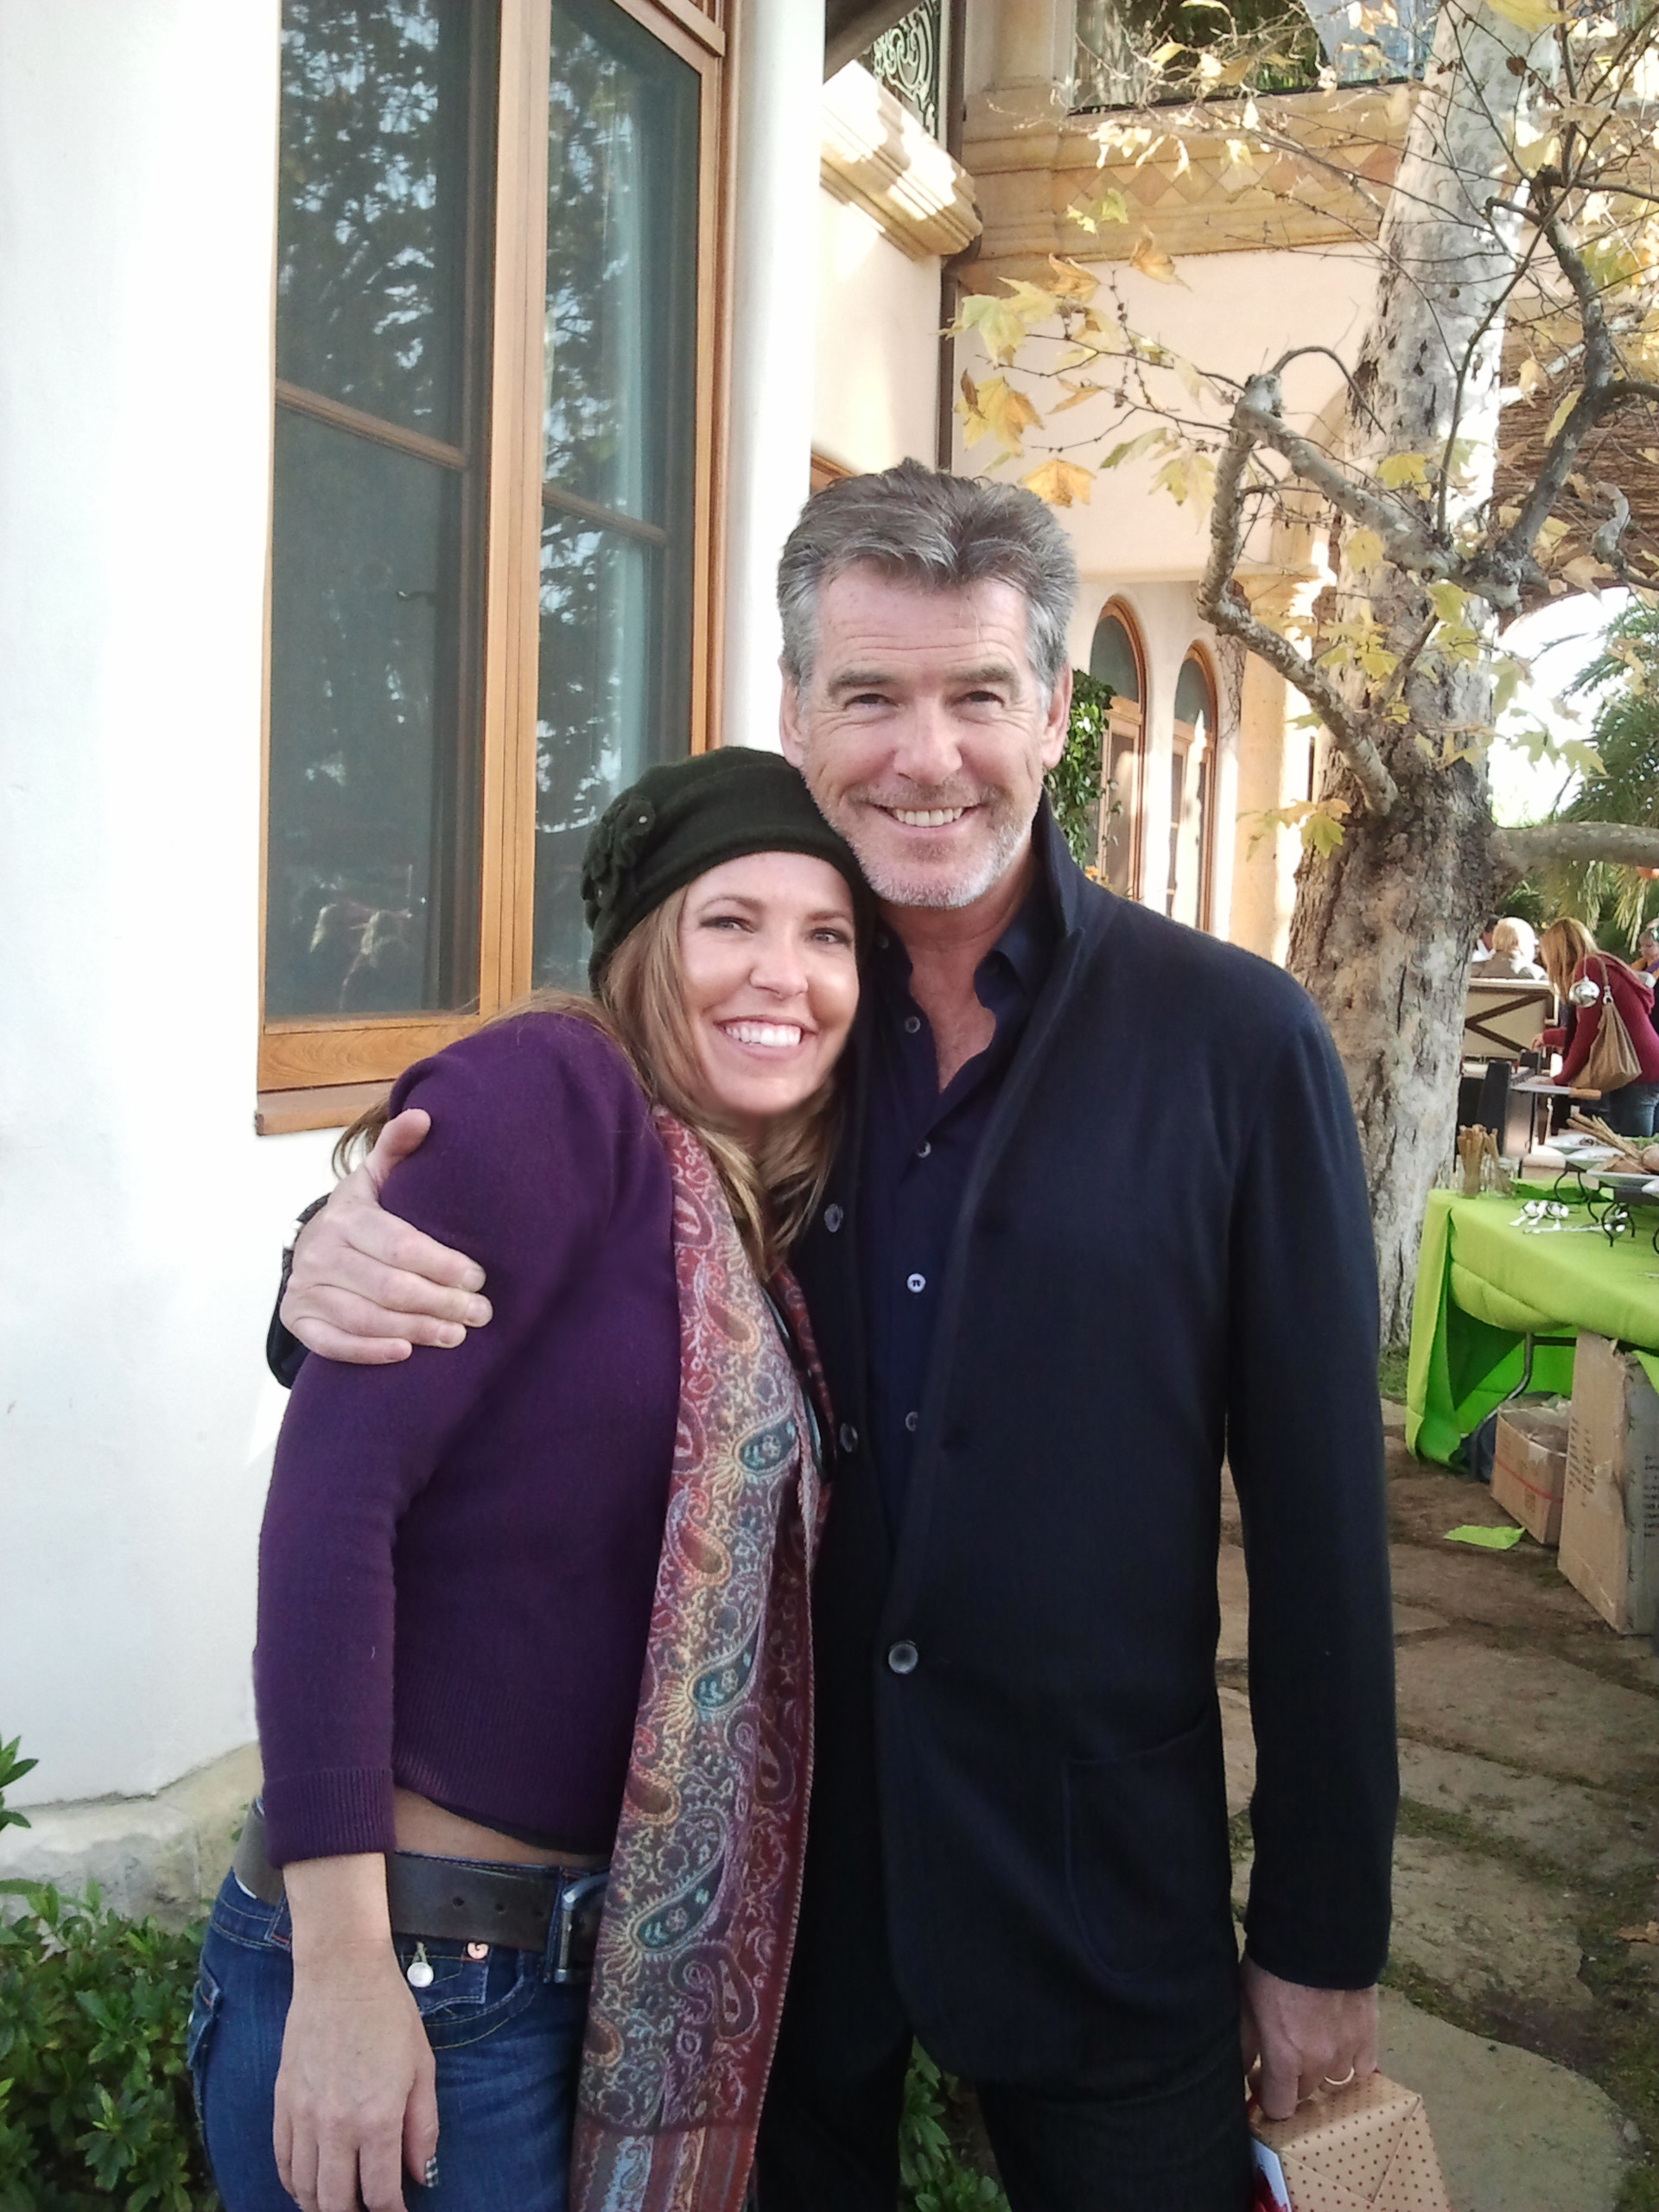 Pierce Brosnan and Me...old friends.